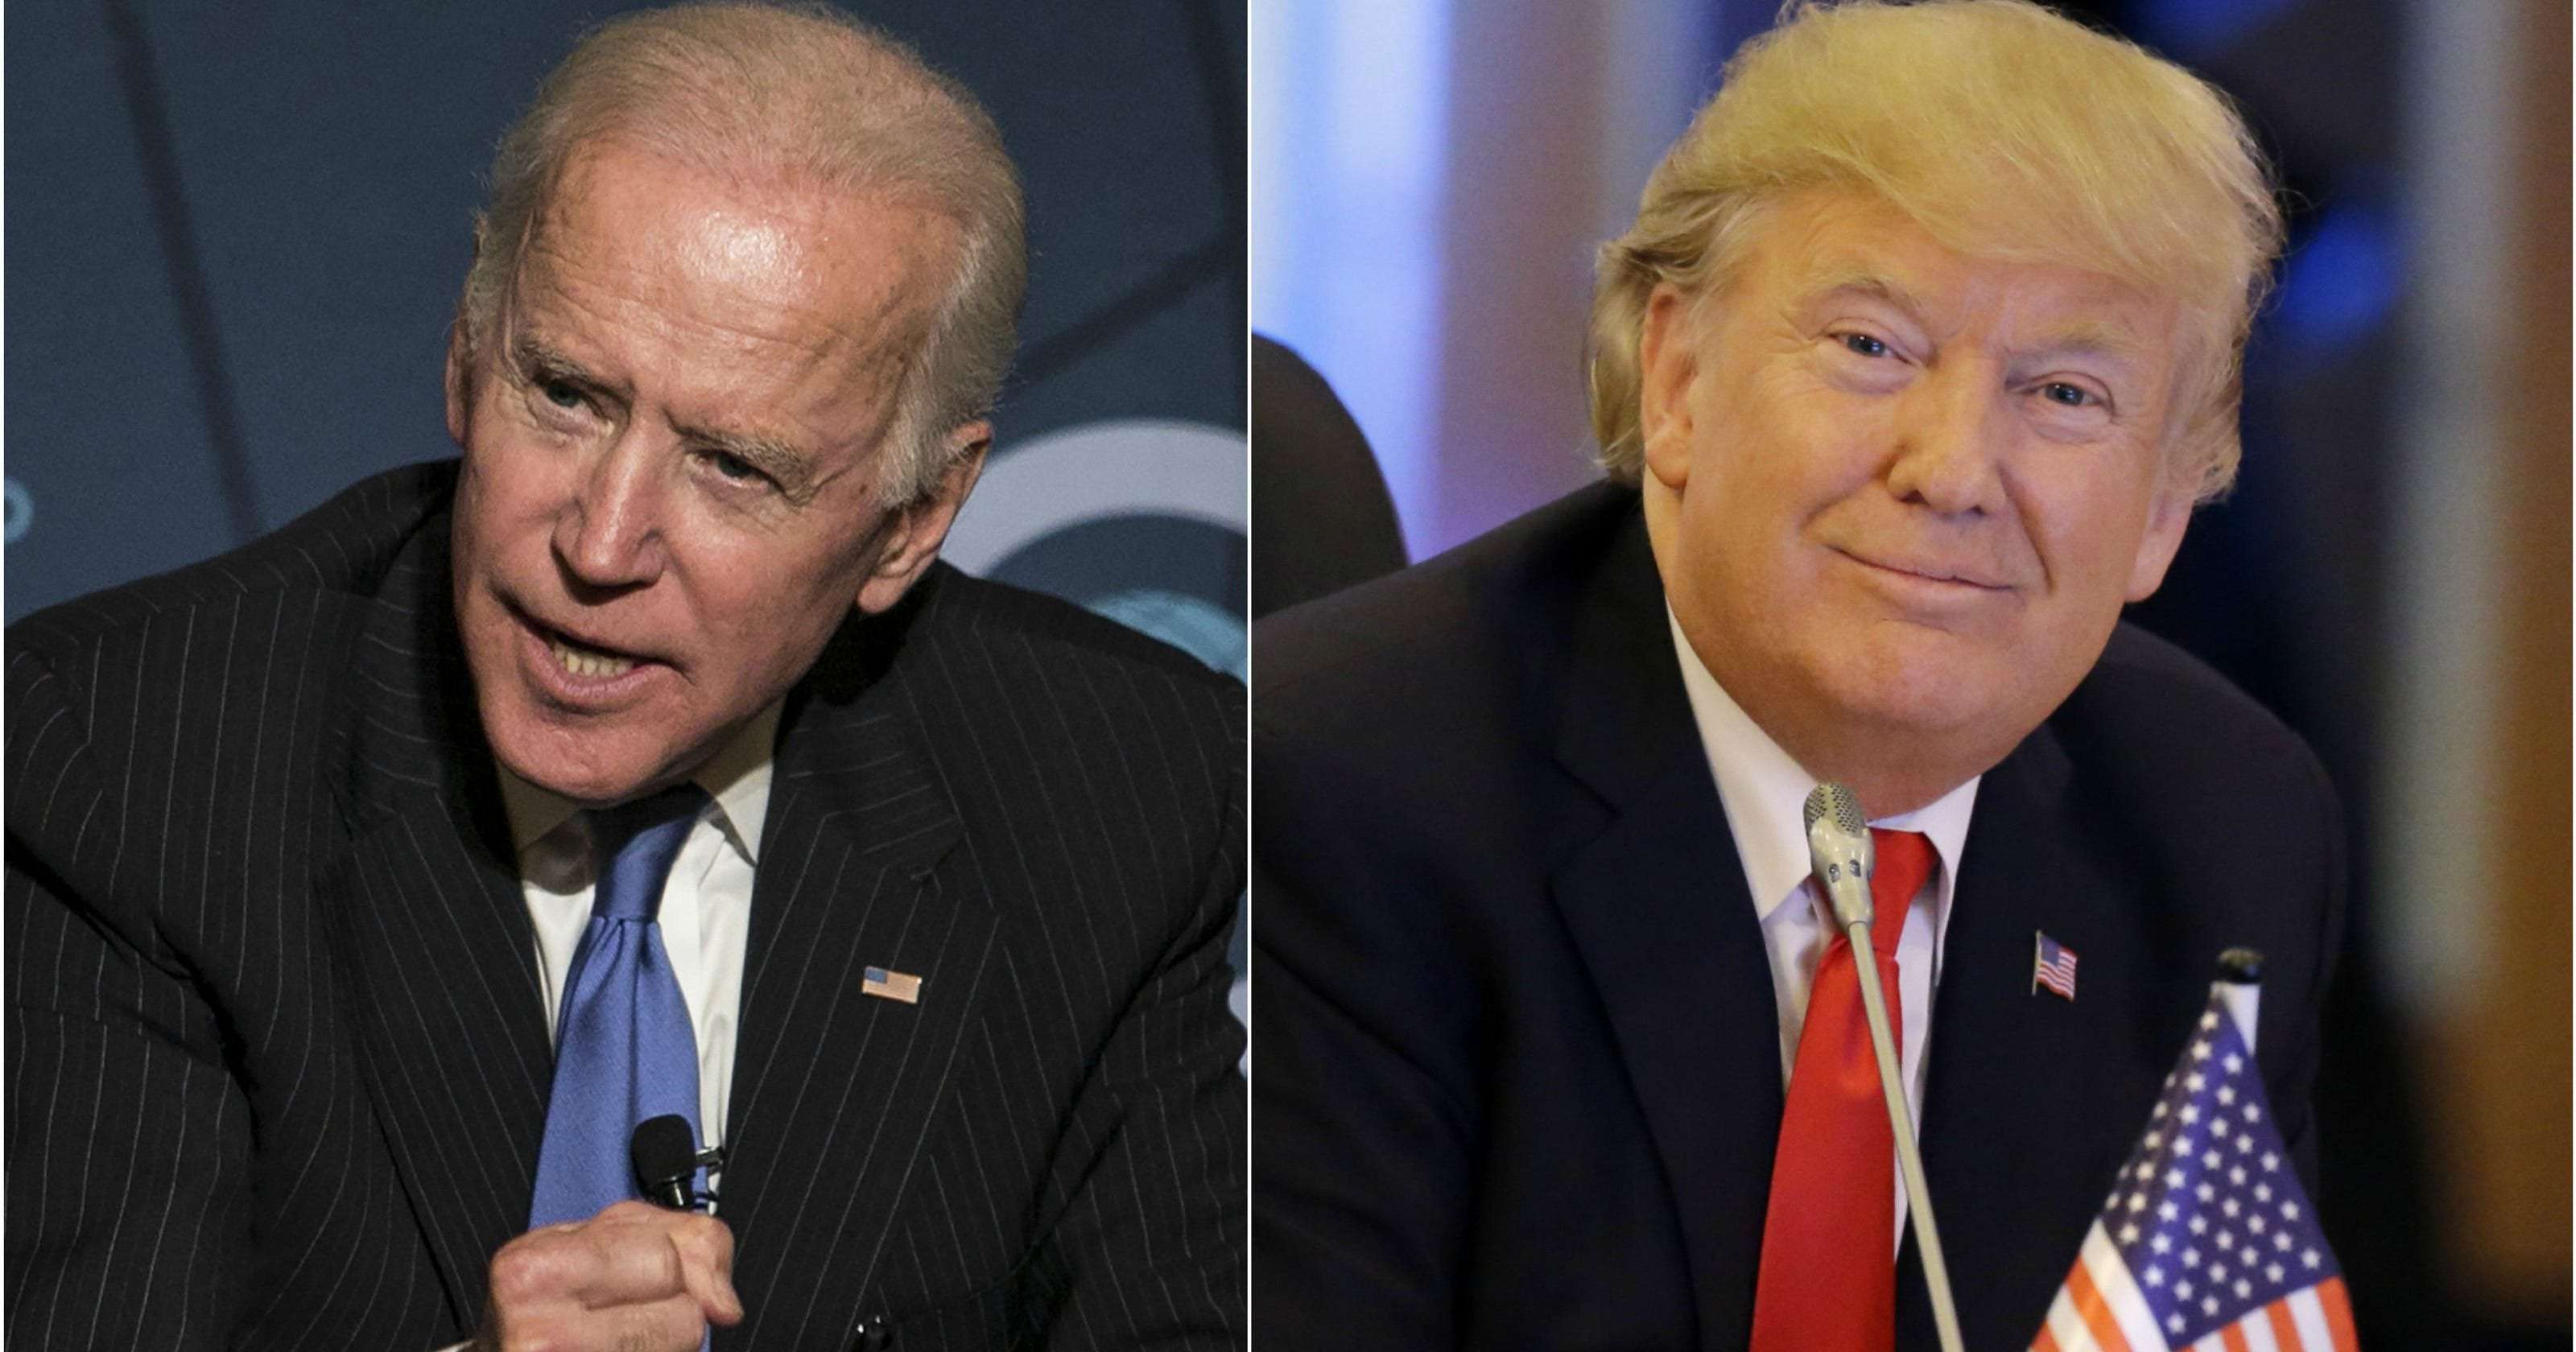 image for New Michigan poll shows Biden leading Trump by 16 points after protest